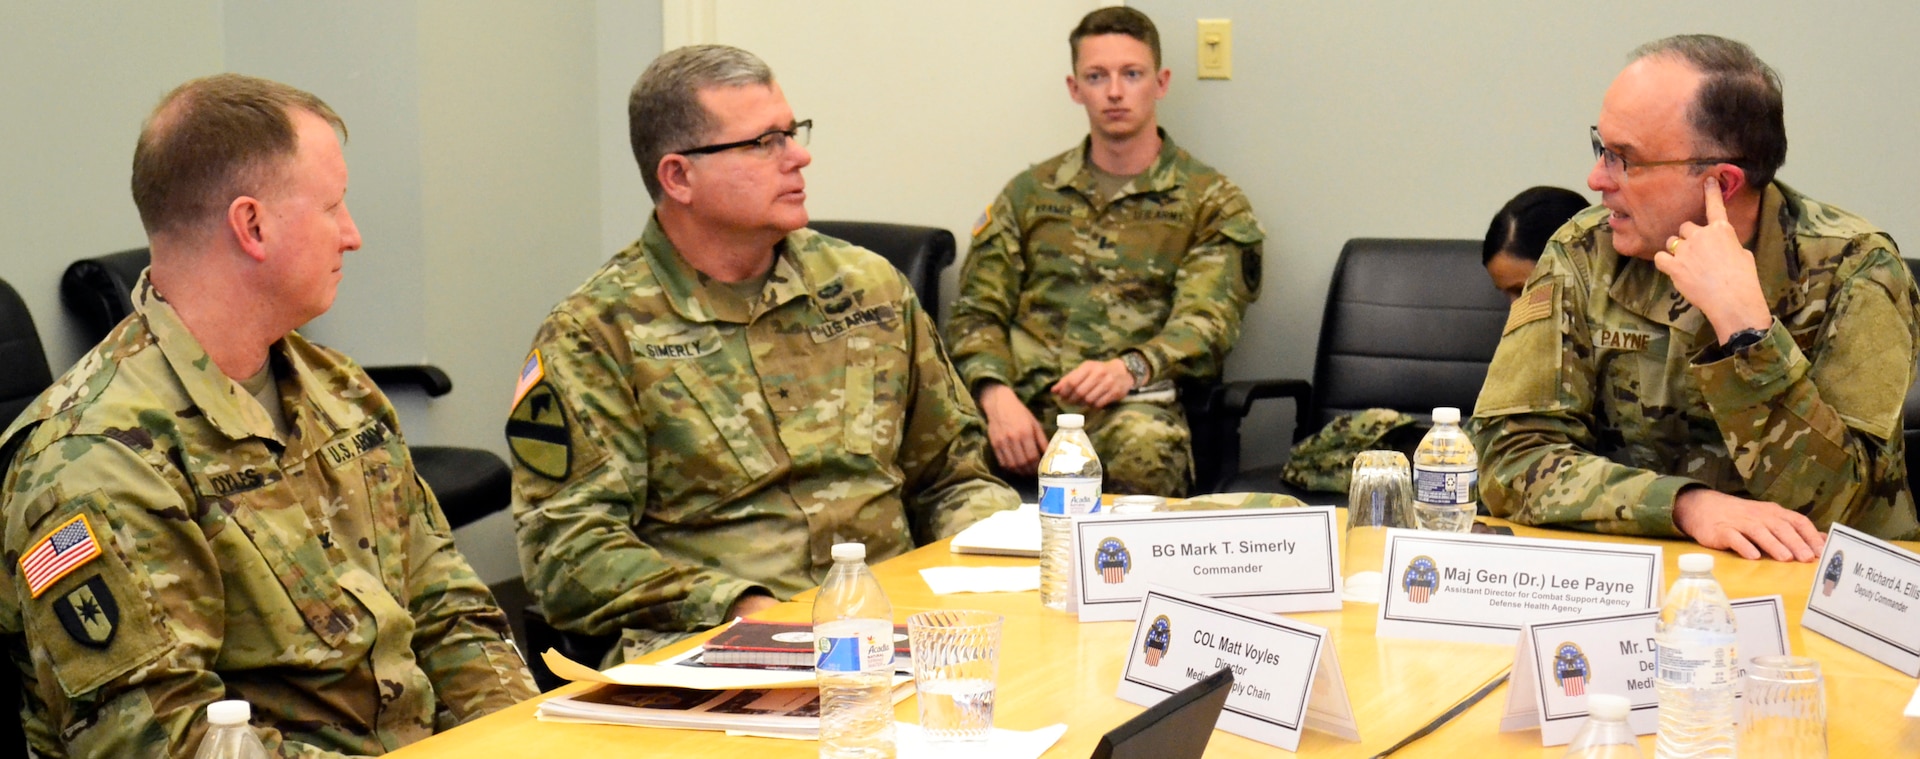 Air Force Maj. Gen. Lee Payne, DHA’s Combat Support Agency assistant director, right, talks with Army Brig. Gen. Mark Simerly, DLA Troop Support commander, center, and Army Col. Matthew Voyles, Medical supply chain director, left, during a visit Jan. 11, 2019 in Philadelphia.